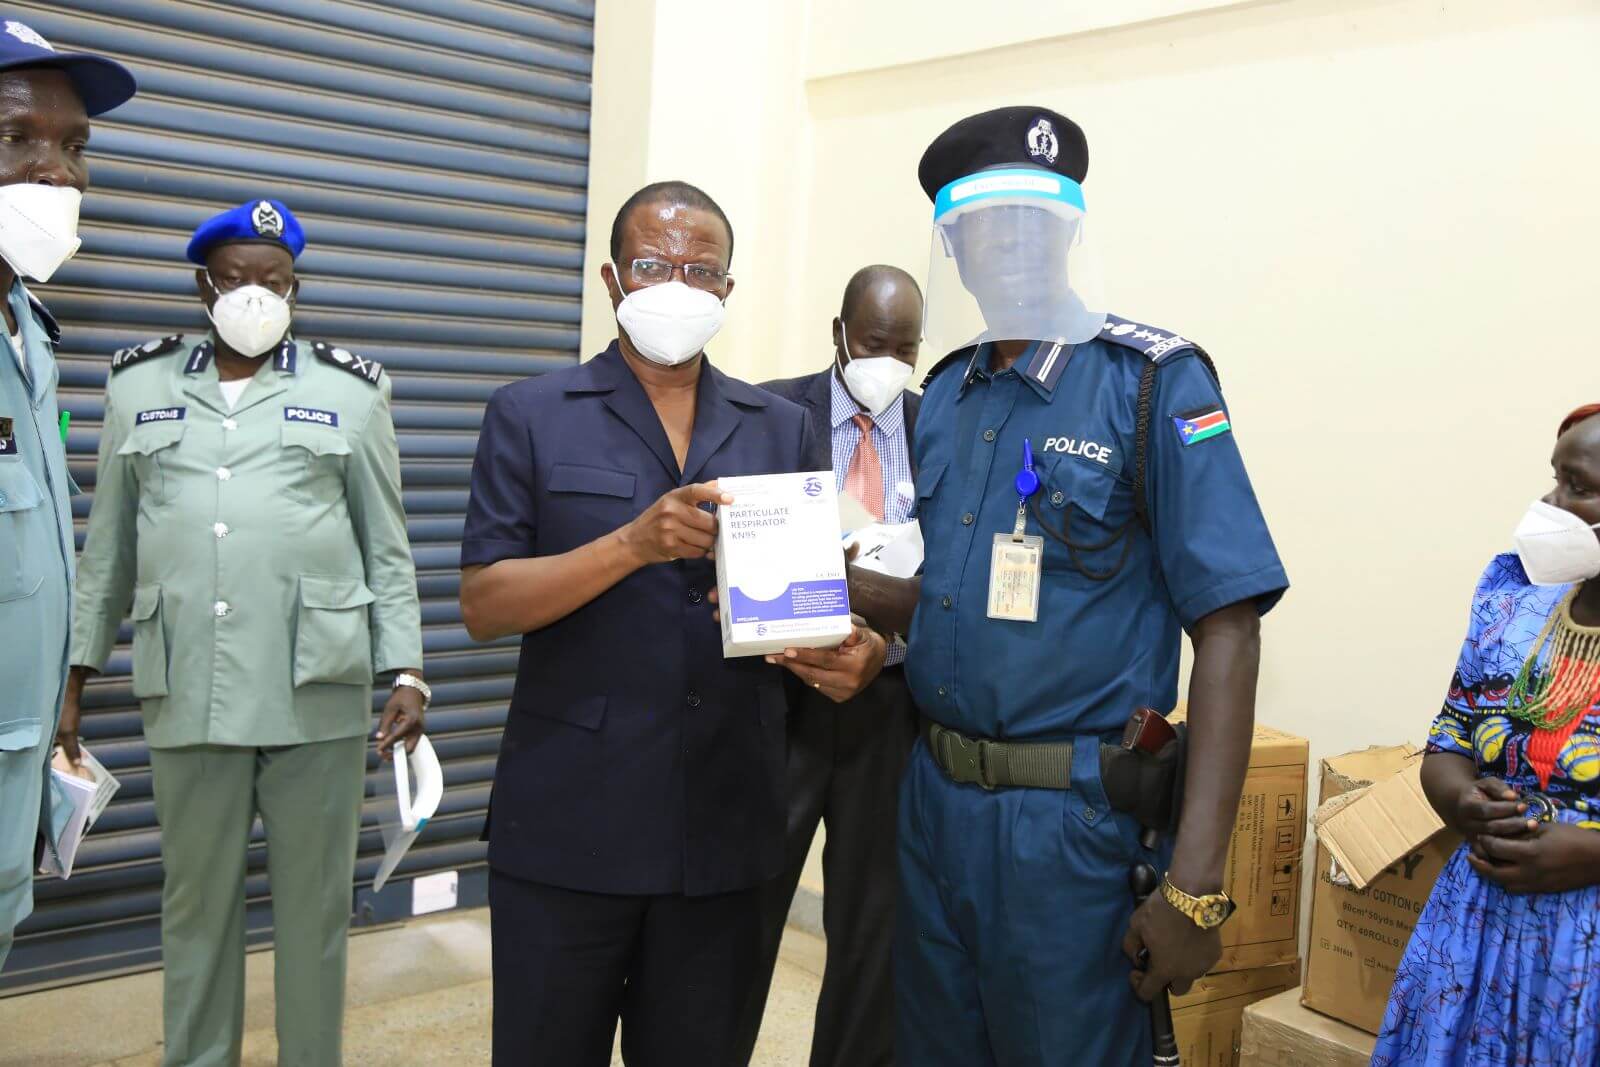 TradeMark Africa Presents Personal Protective Equipment (PPE) Worth US$ 110,000 to the Government of South Sudan to Bolster Fight Against Covid-19